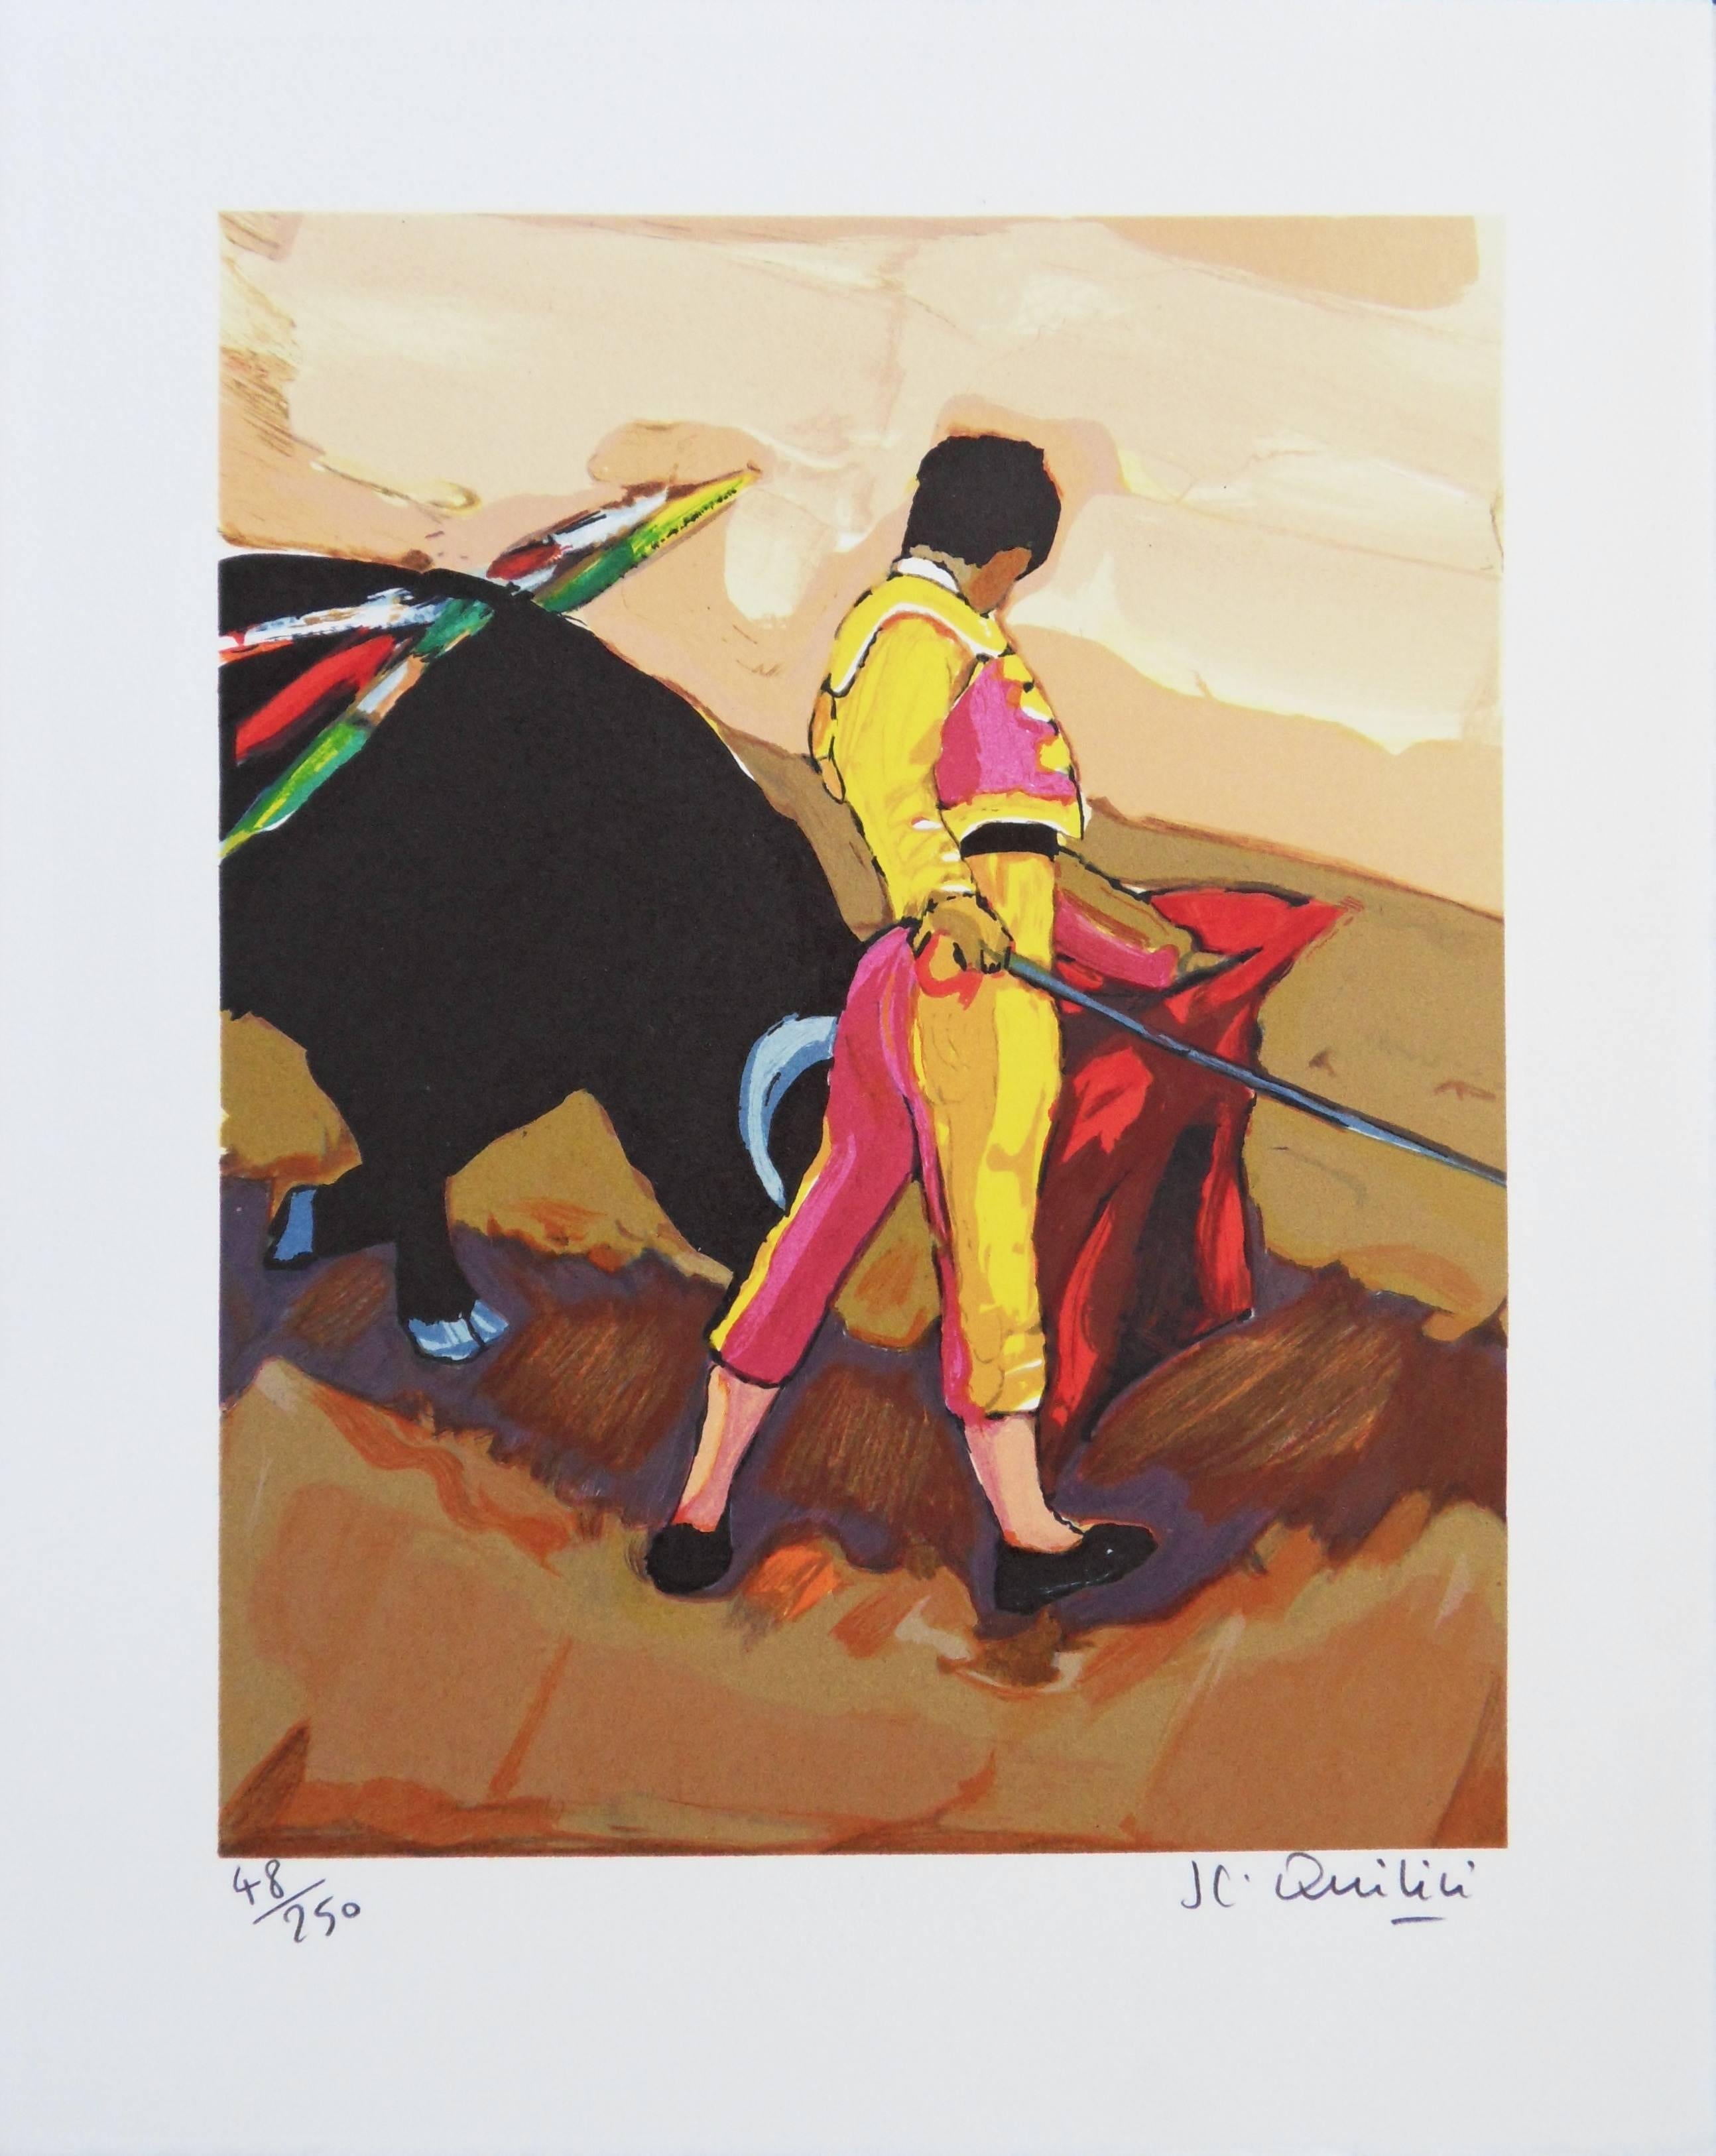 Jean-Claude Quilici - Toreador - Handsigned lithograph For Sale at 1stDibs